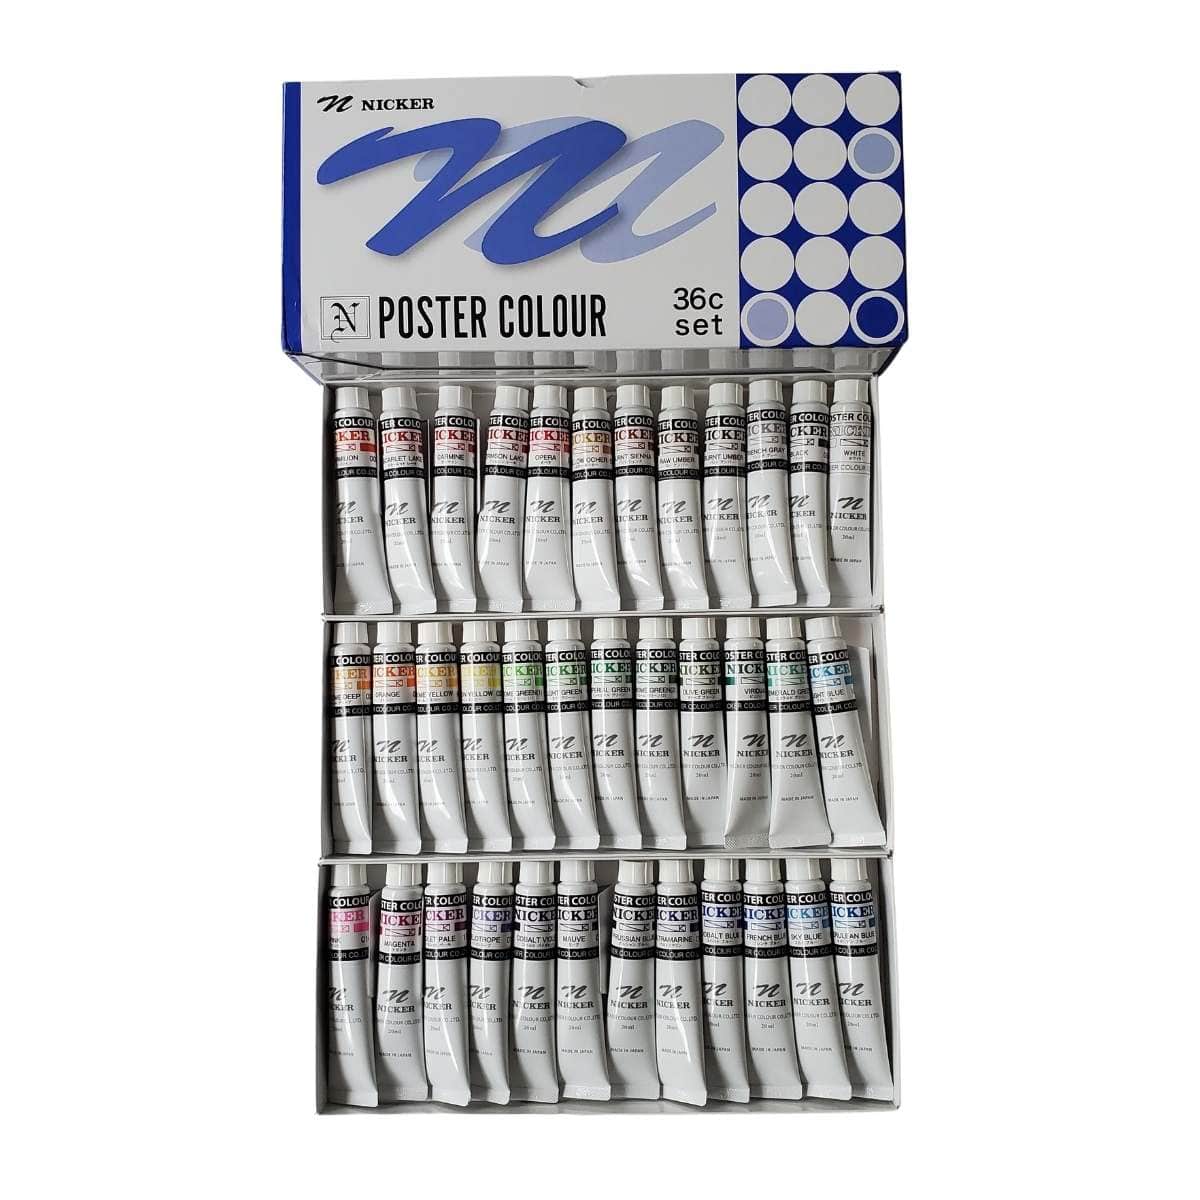 Nicker Poster Color 18 colors 40ml PC40ML18N Watercolor paint From Japan  +Track